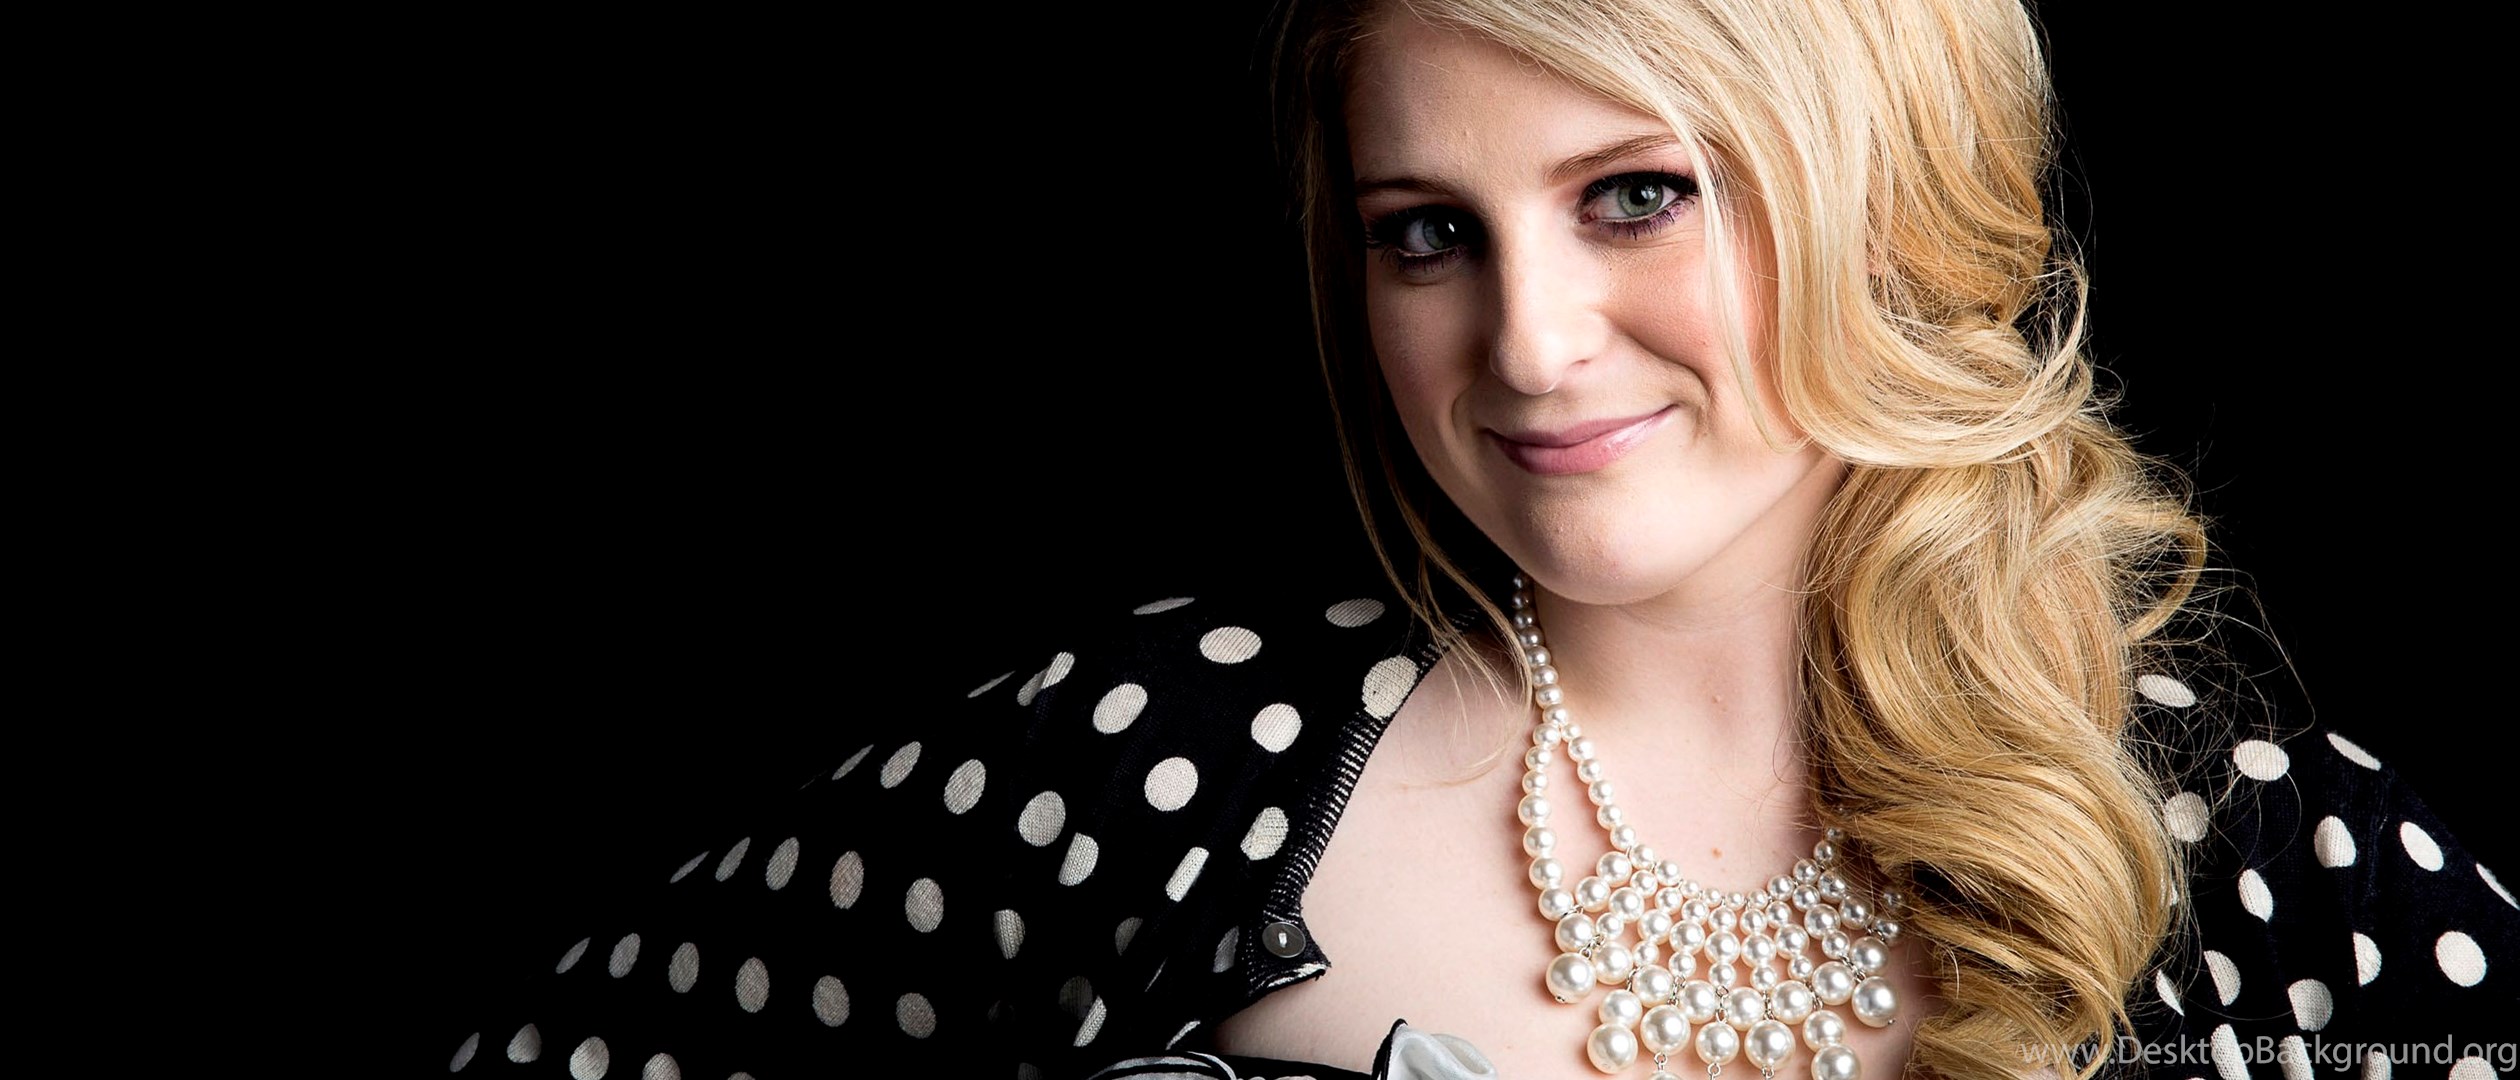 Download Meghan Trainor Wallpapers High Resolution And Quality Download Wid...